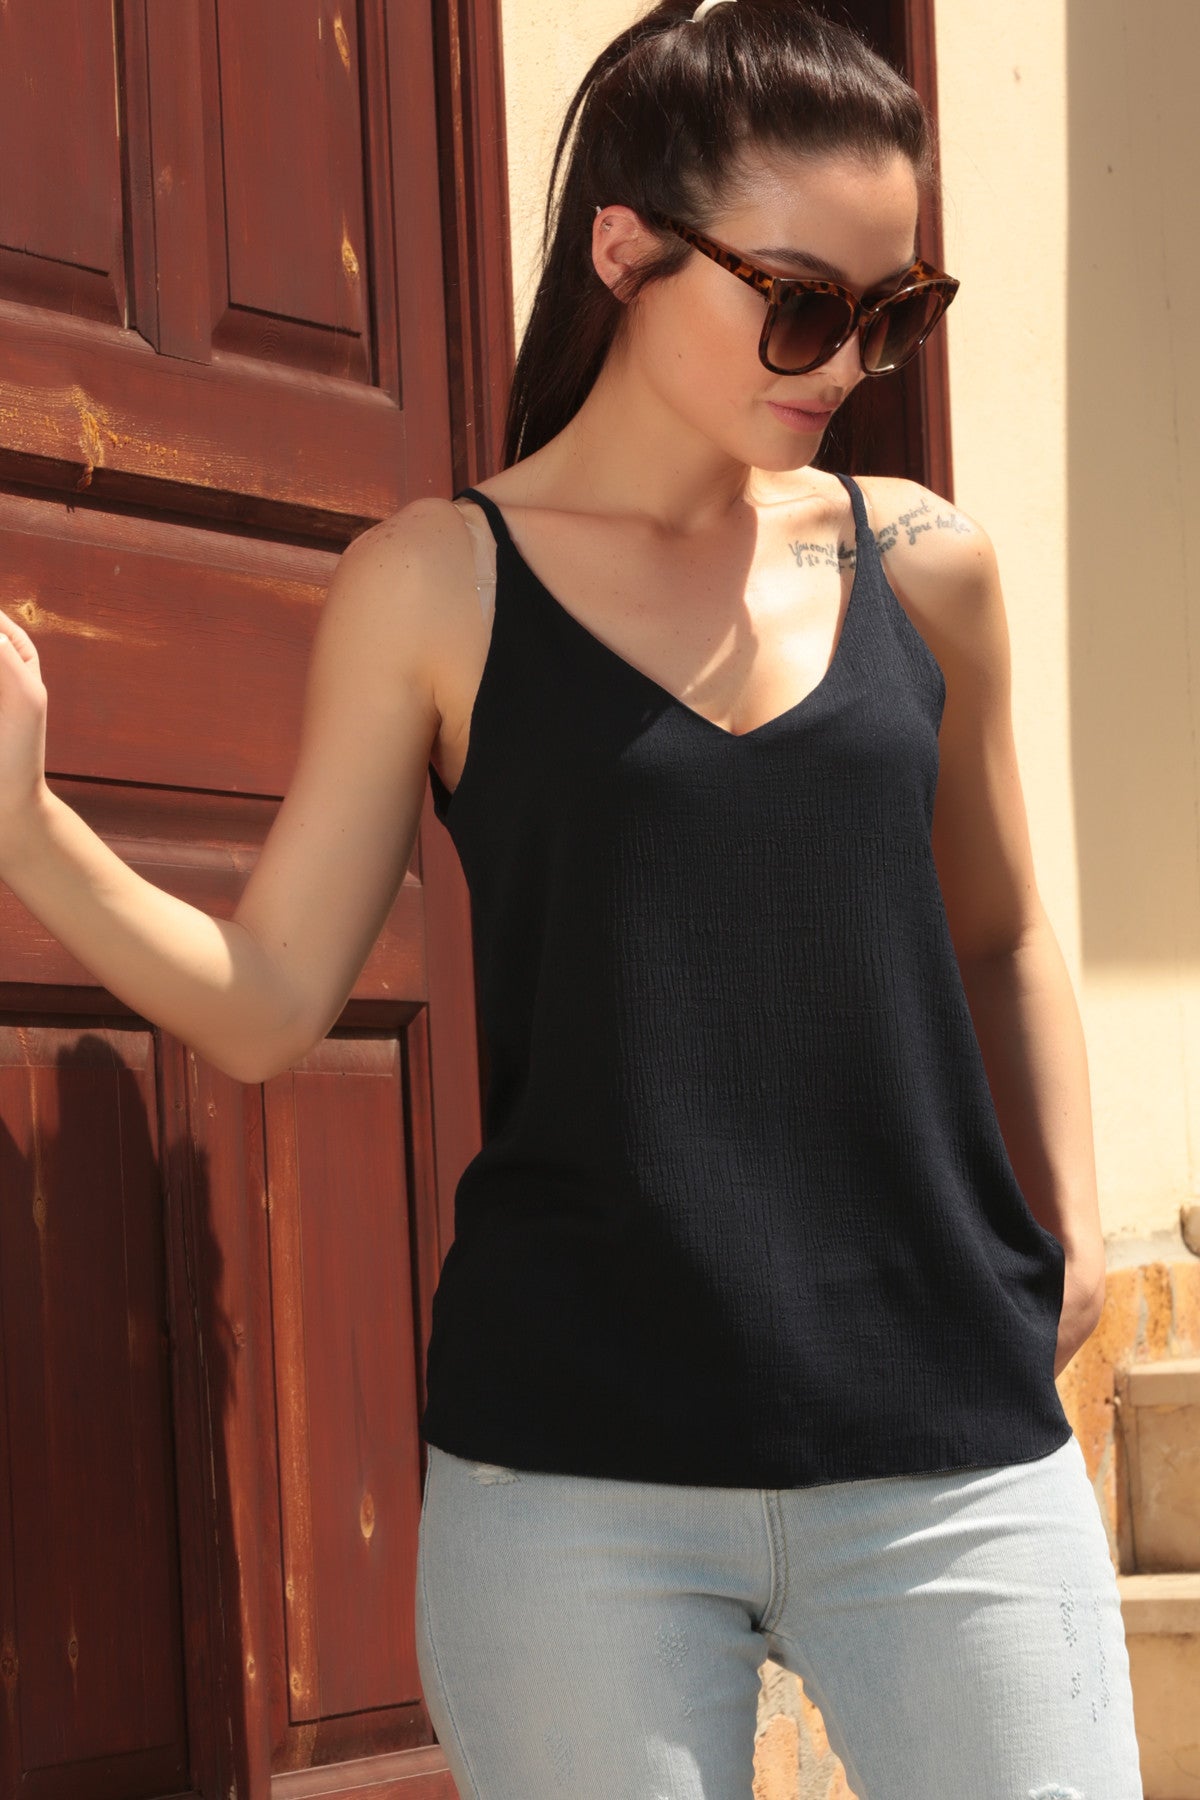 Woman Navy Blouse with Blouse Arm-17y00005